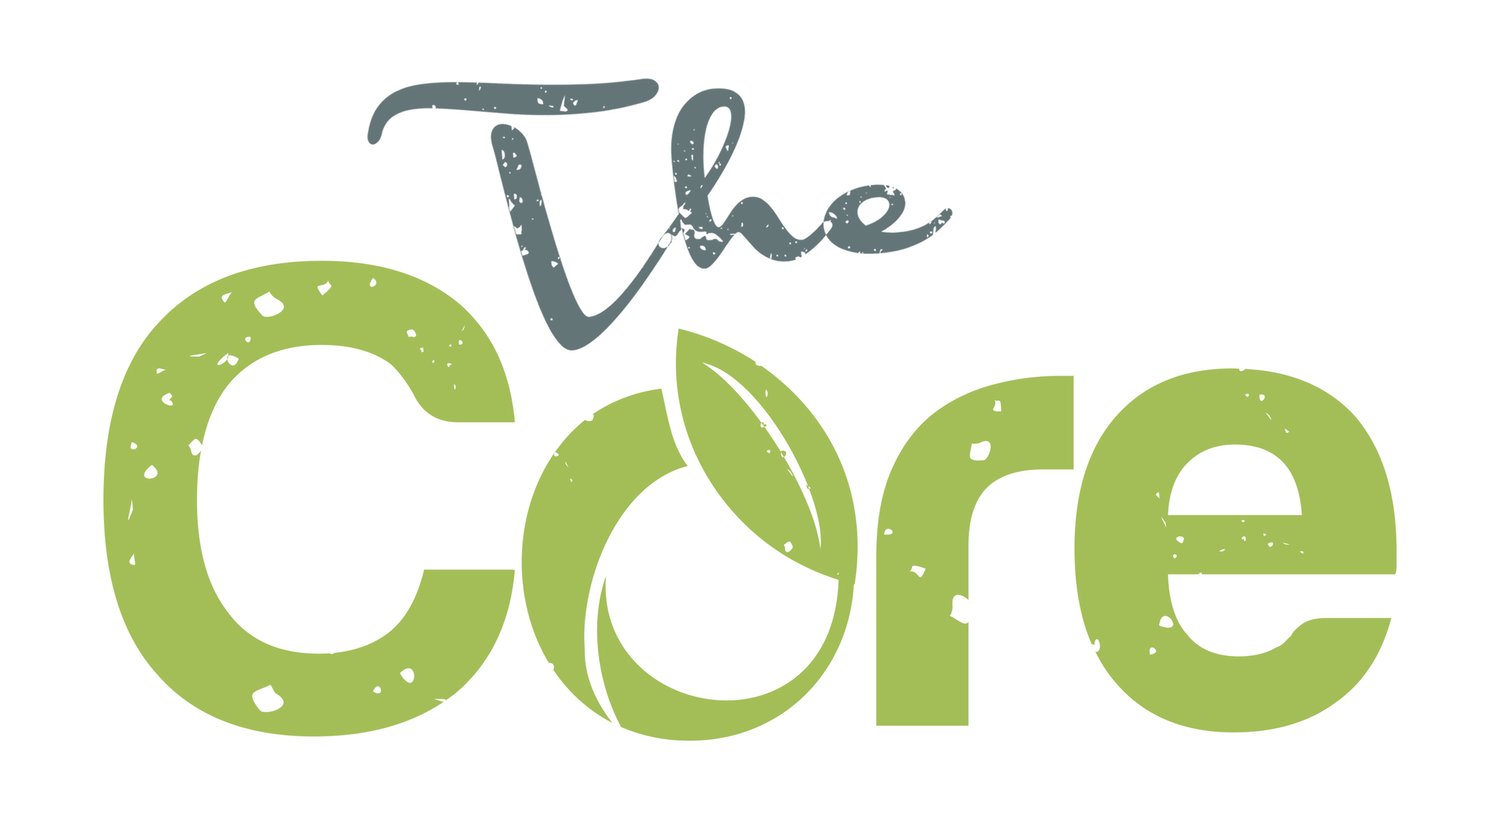 The Core Juicery